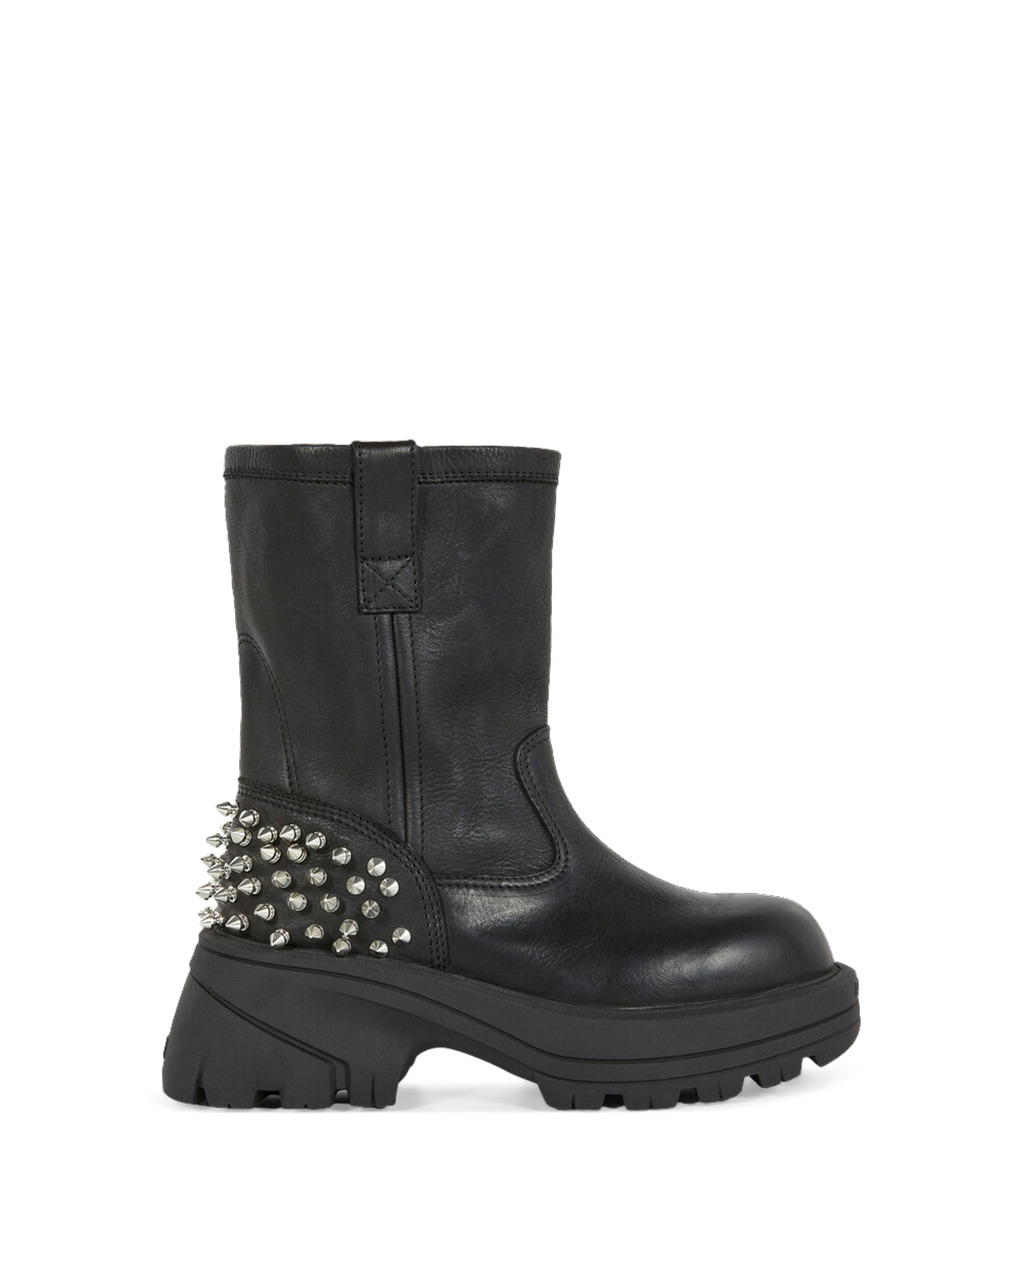 WORK BOOT WITH STUDS (C) - 1